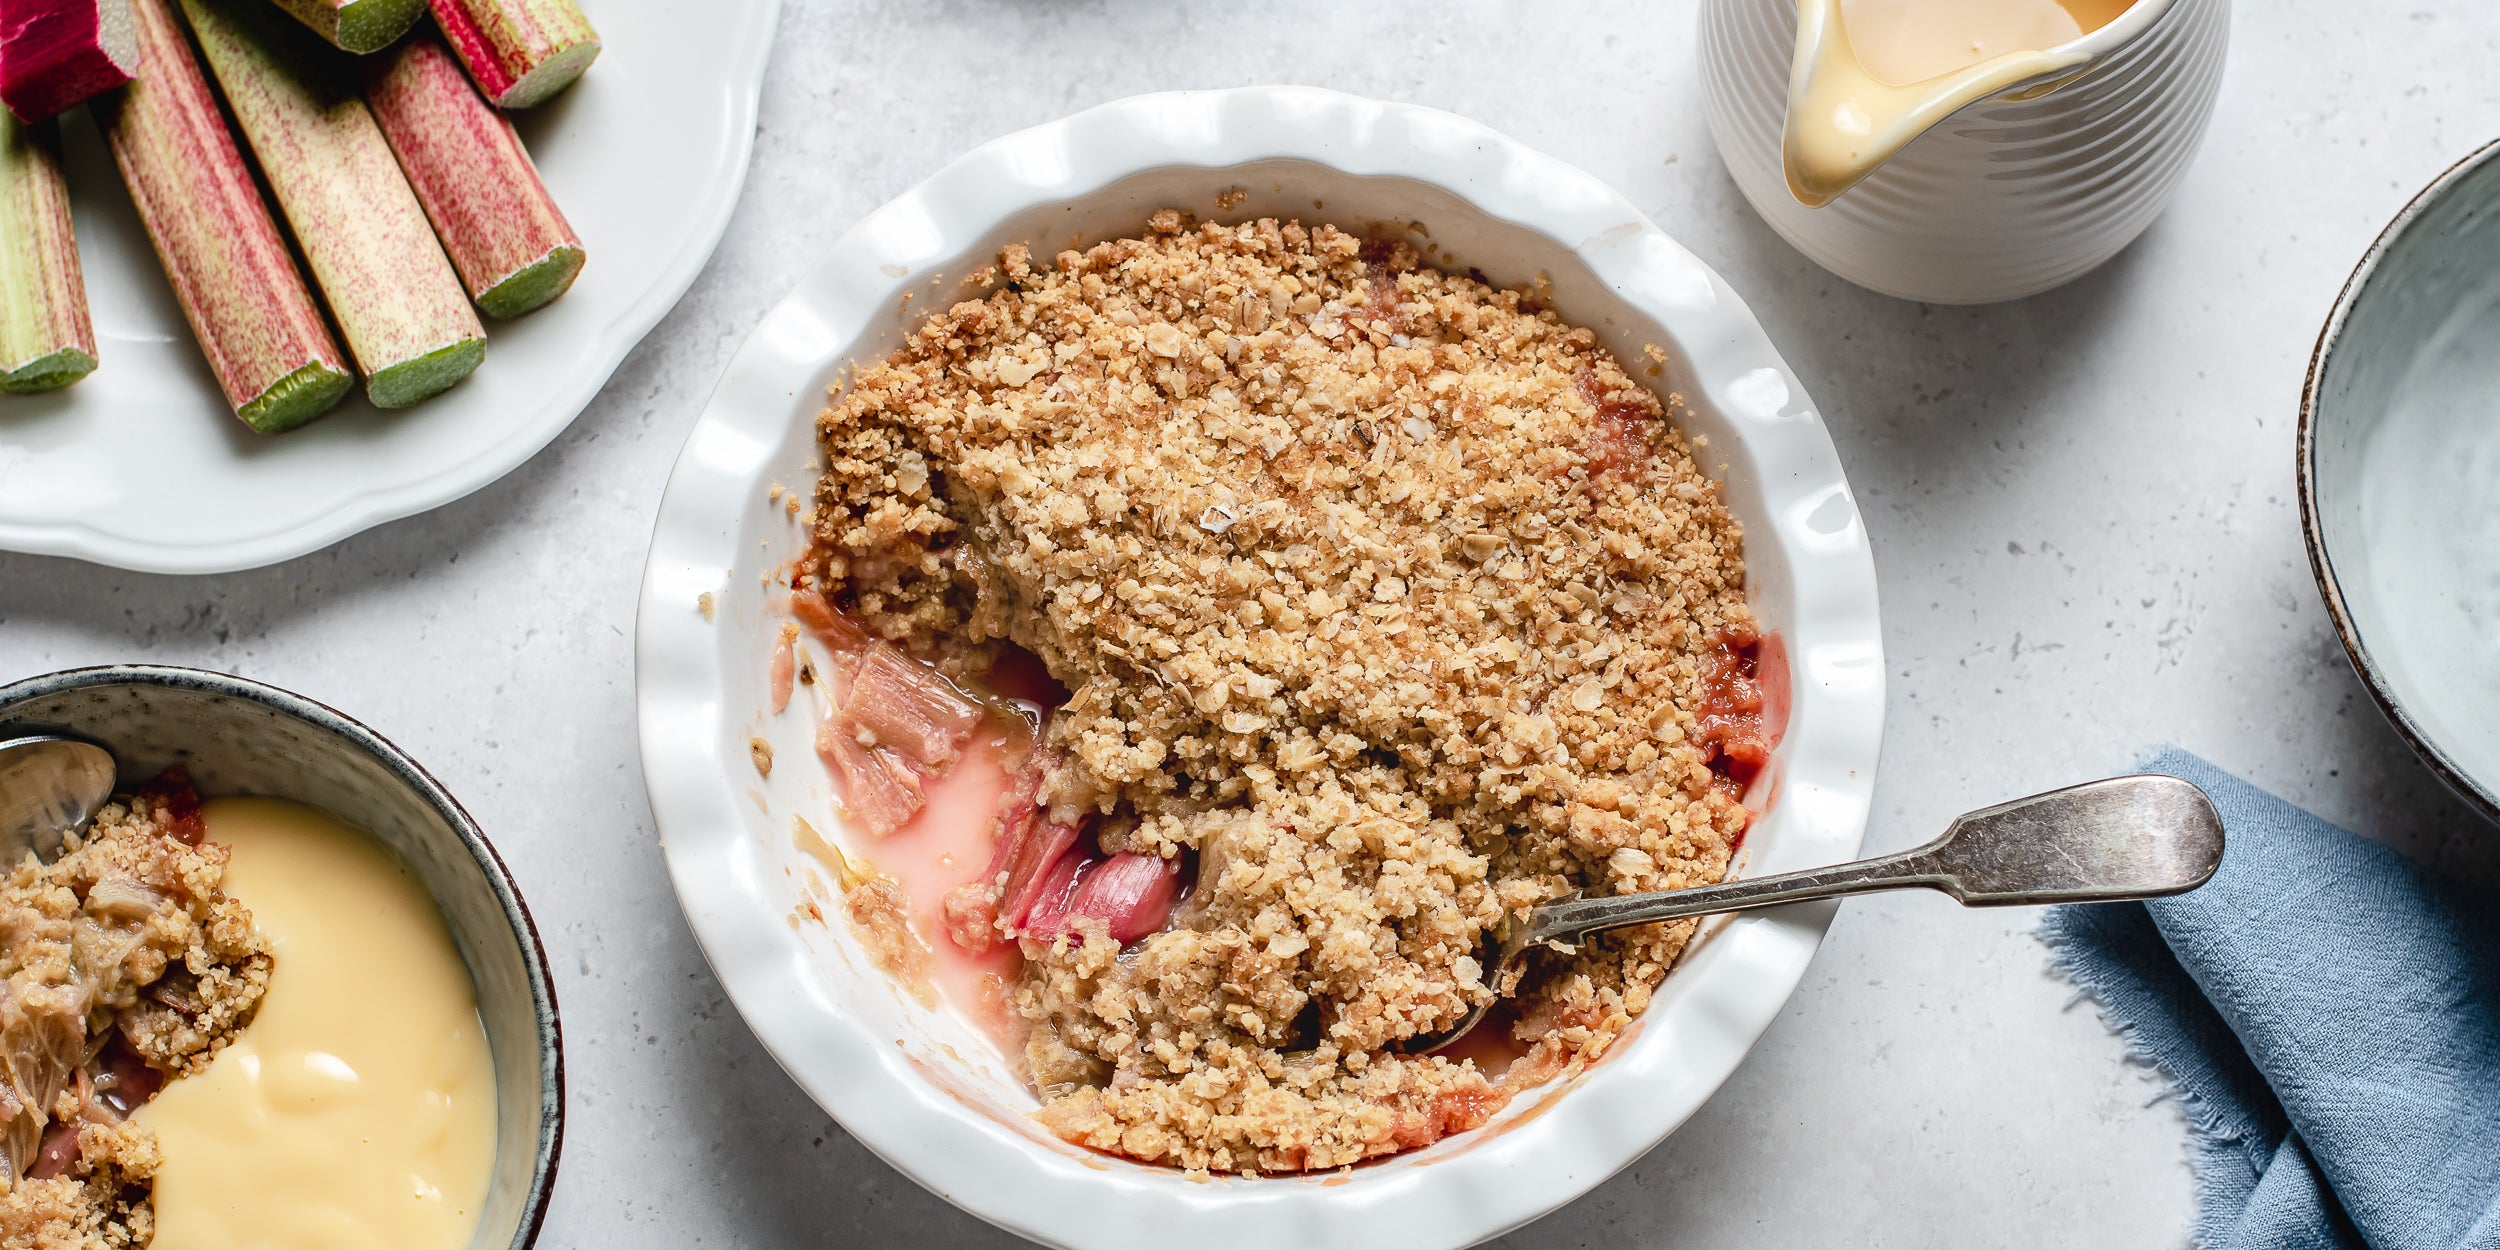 Close up on Rhubarb Crumble freshly baked with a spoon dipping into to serve